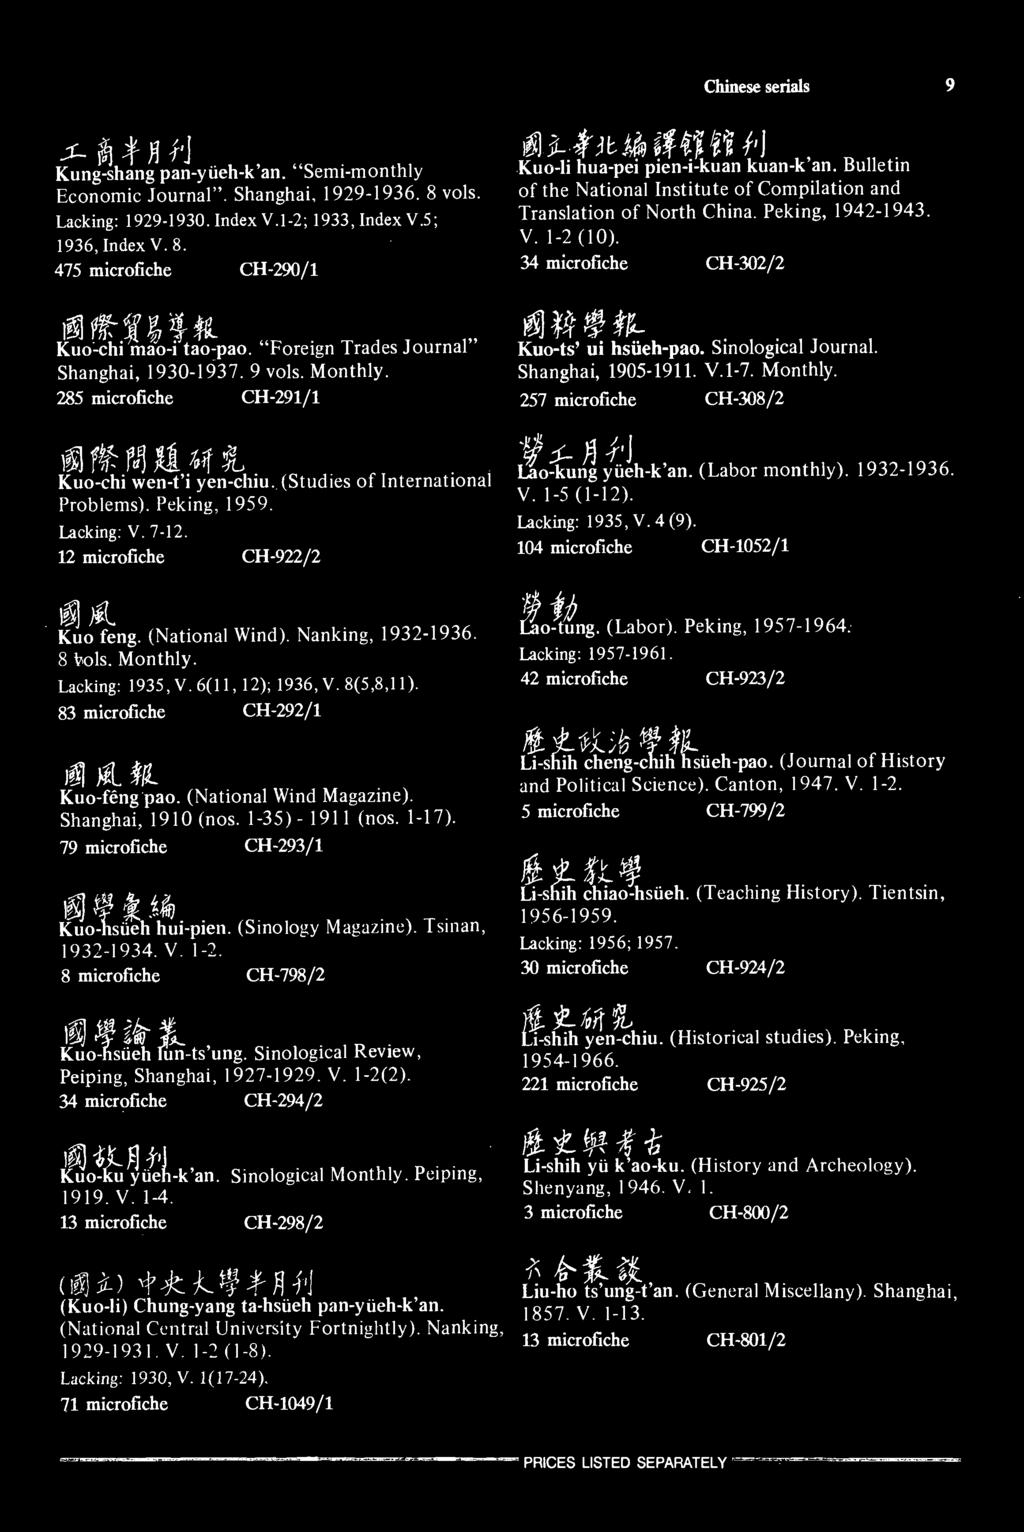 285 microfiche CH-291/1 0_443LA if 00 H Kuo-li hua-pei pien-i-kuan kuan-k'an. an. Bulletin of the National Institute of Compilation and Translation of North China. Peking, 1942-1943. V. 1-2(10).